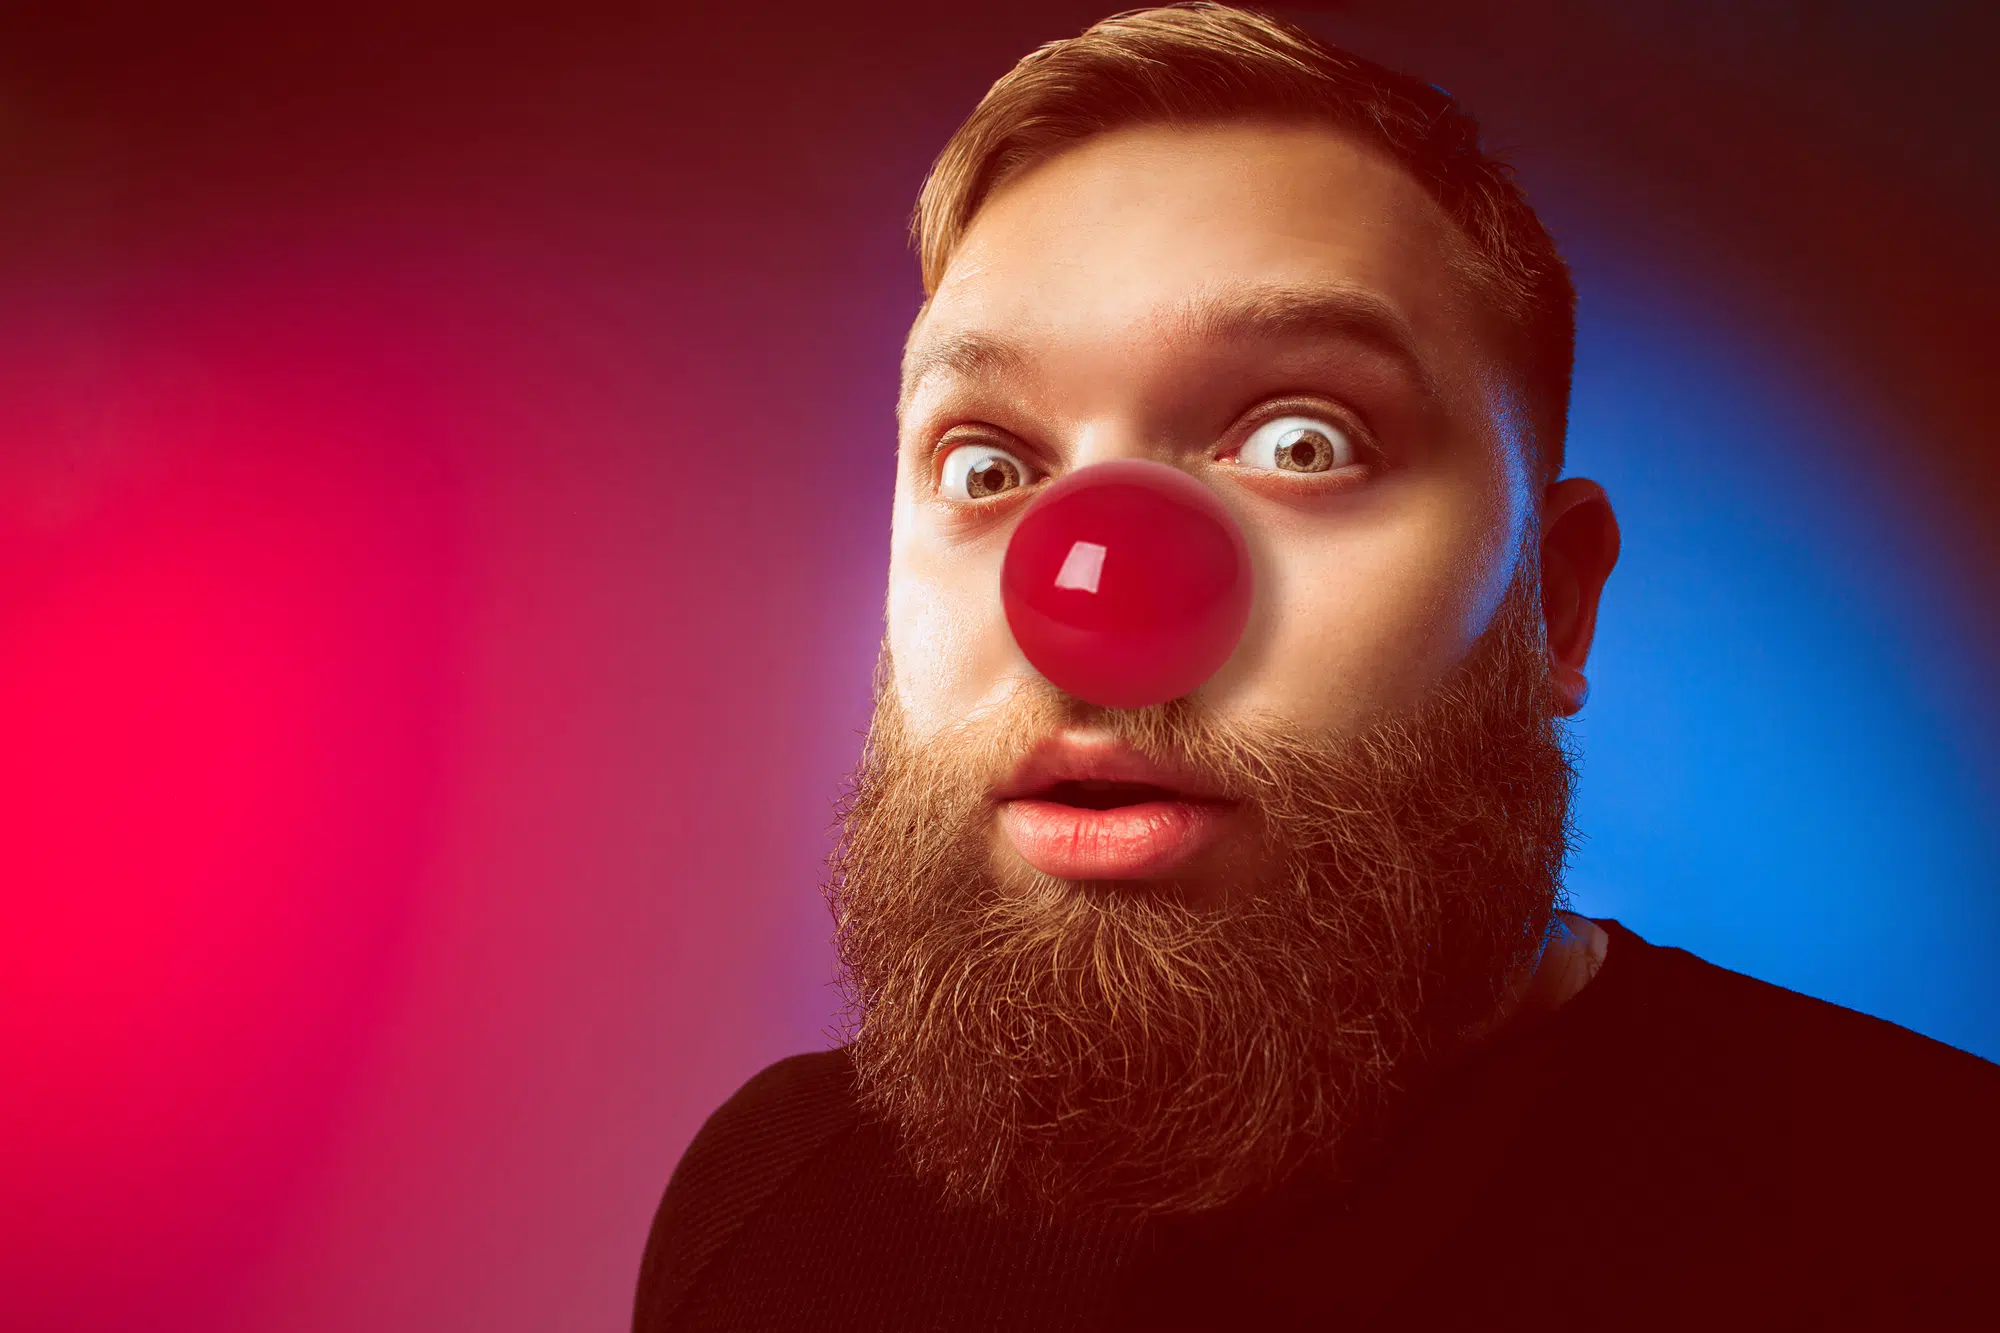 The happy surprised and smiling man on red nose day. The clown, fun, party, celebration, funny, joy, holiday, humor concept